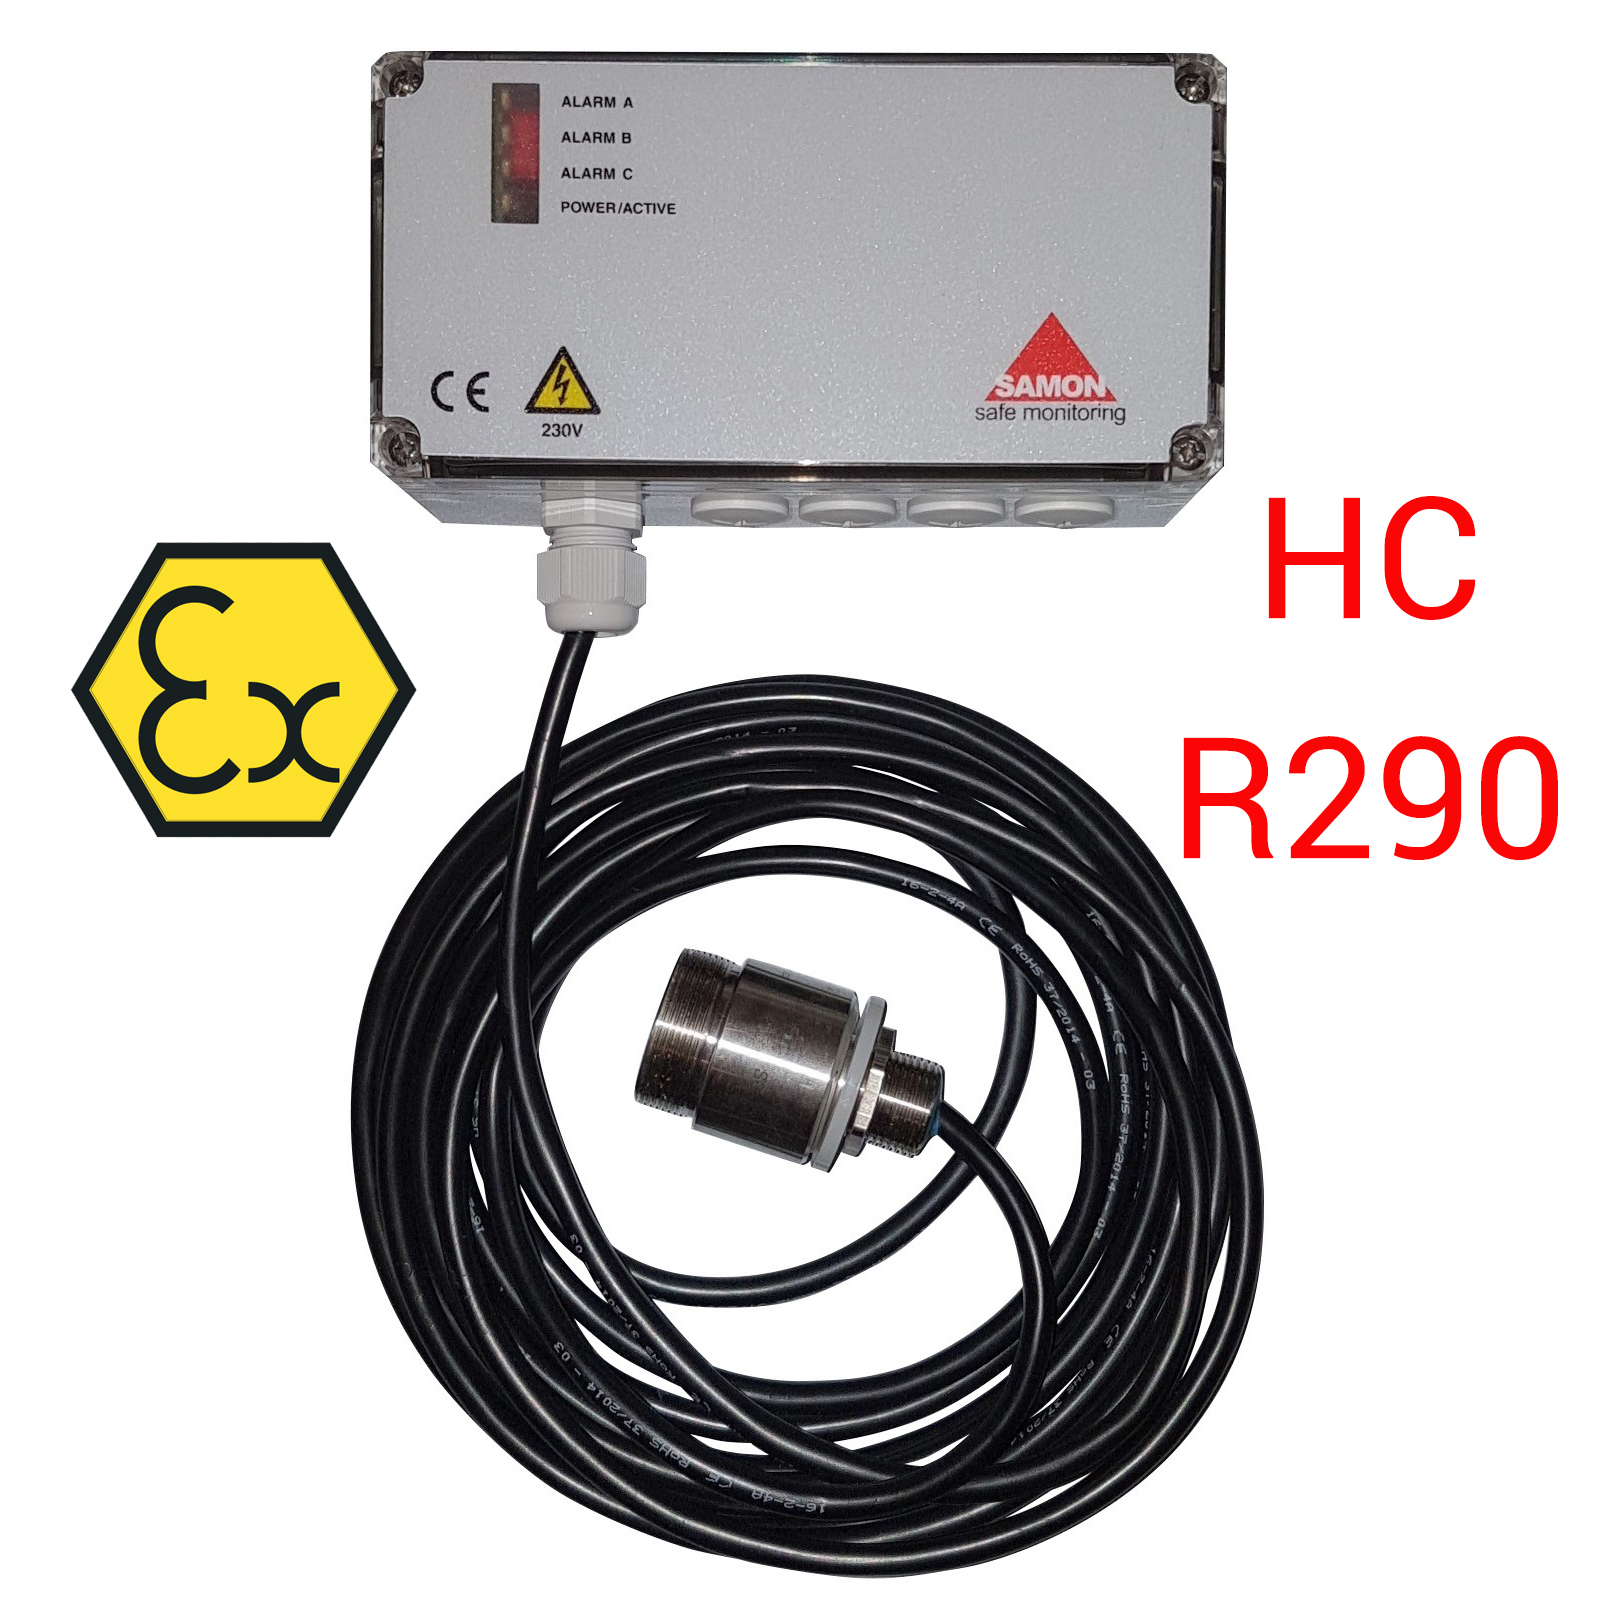 SAMON GXR230-HC: ATEX detection unit with remote sensor, for propane R290 and HC - unit with relay output and semiconductor sensor (SC)